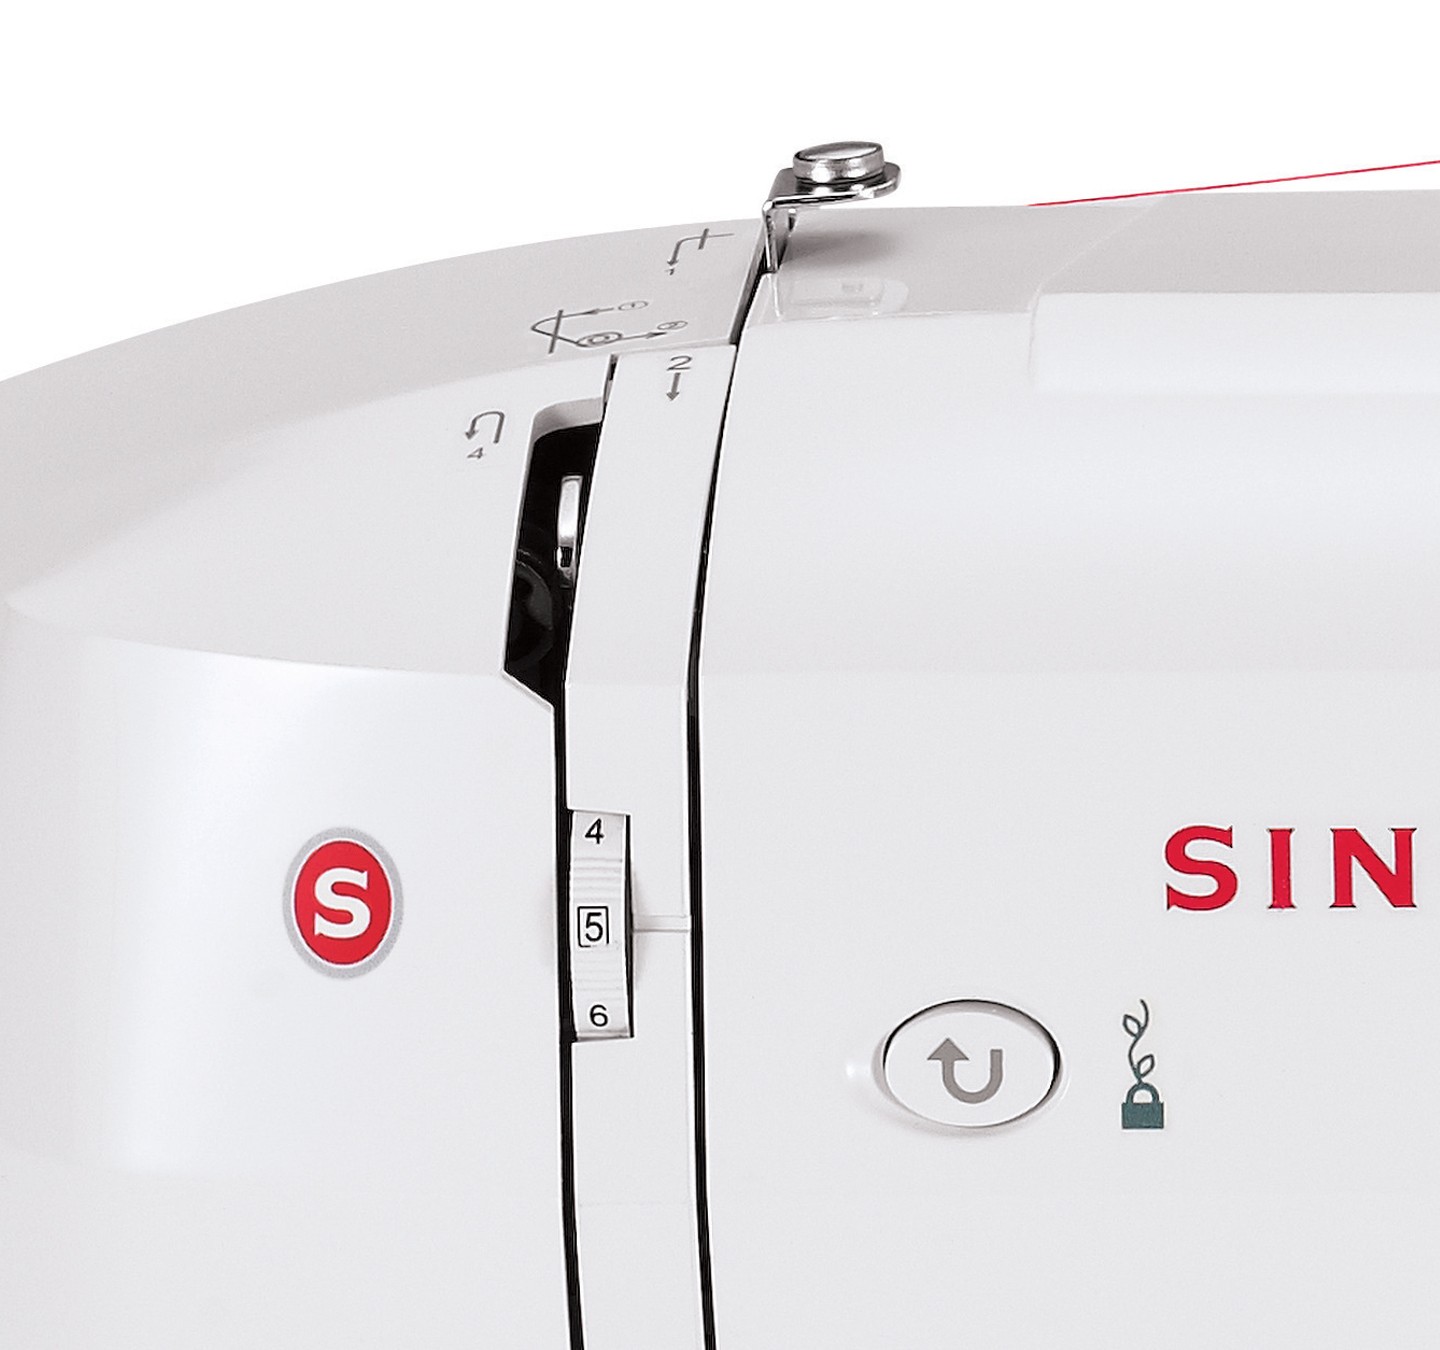 SINGER BRILLIANCE Singer Sewing < 6180 Electronic Machine Machines < Sewing Household 